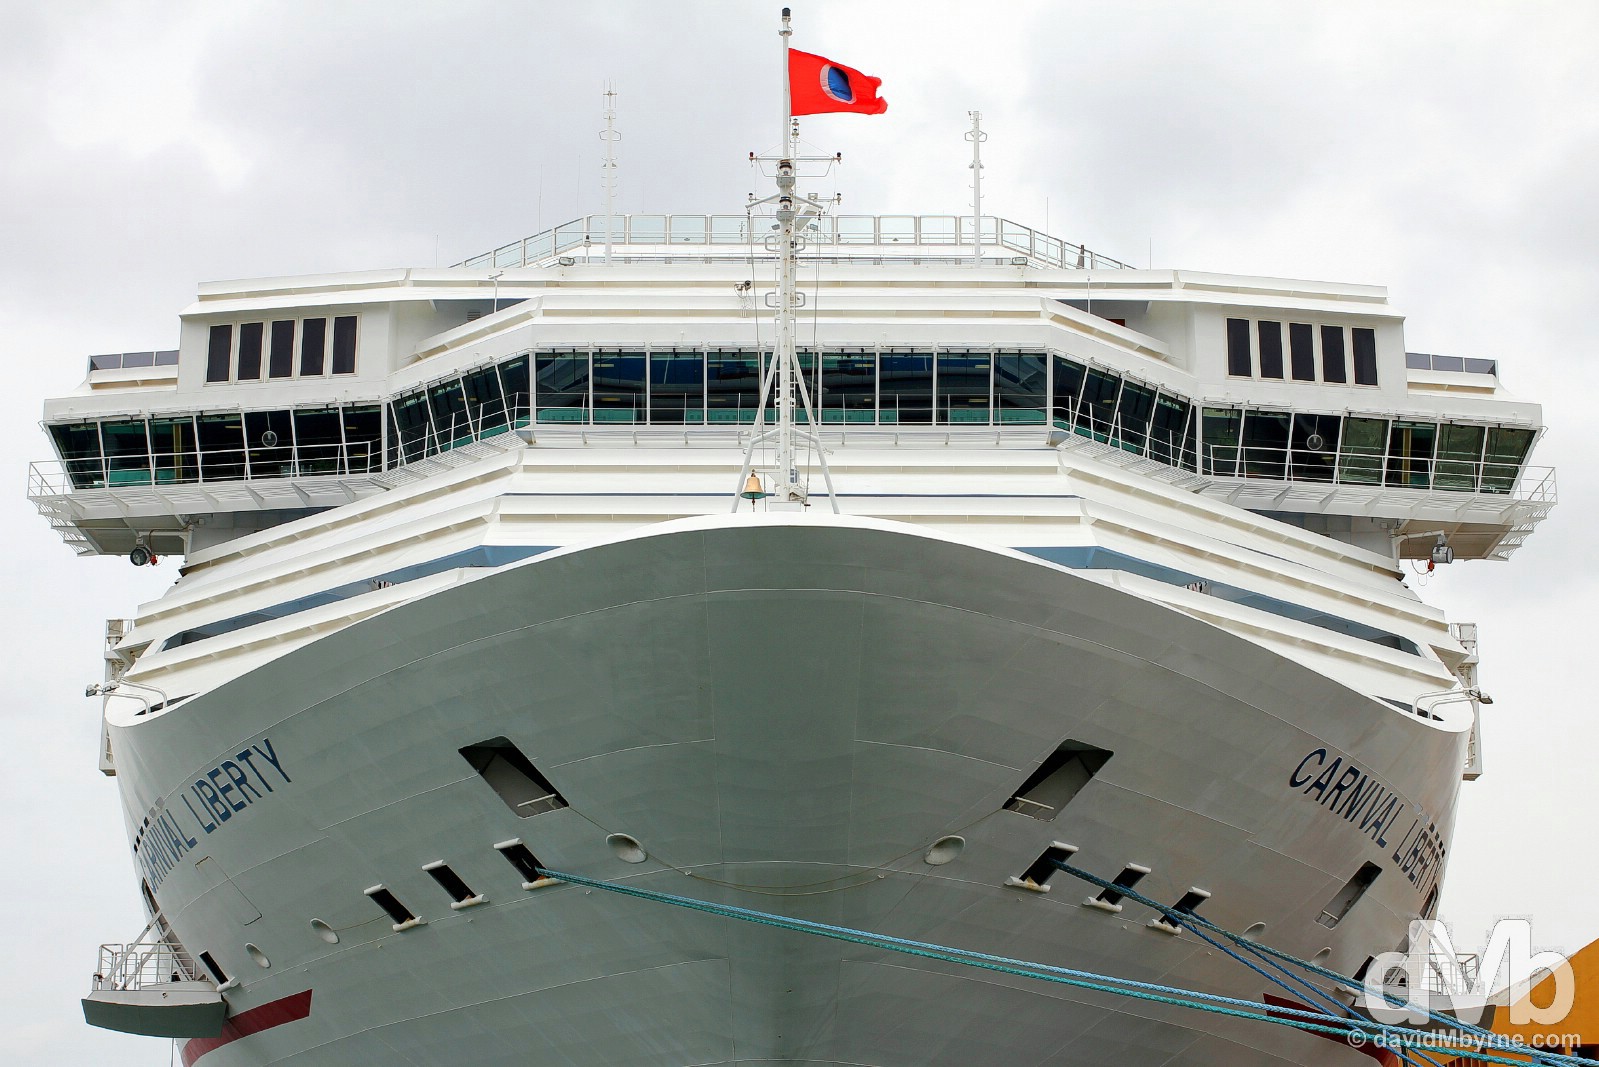 The Carnival Cruise Line's 110,000-tonne, 290 metre-long, 13 deck-high Carnival Liberty cruise ship docked in Old San Juan, Puerto Rico, Greater Antilles. May 31, 2015. 